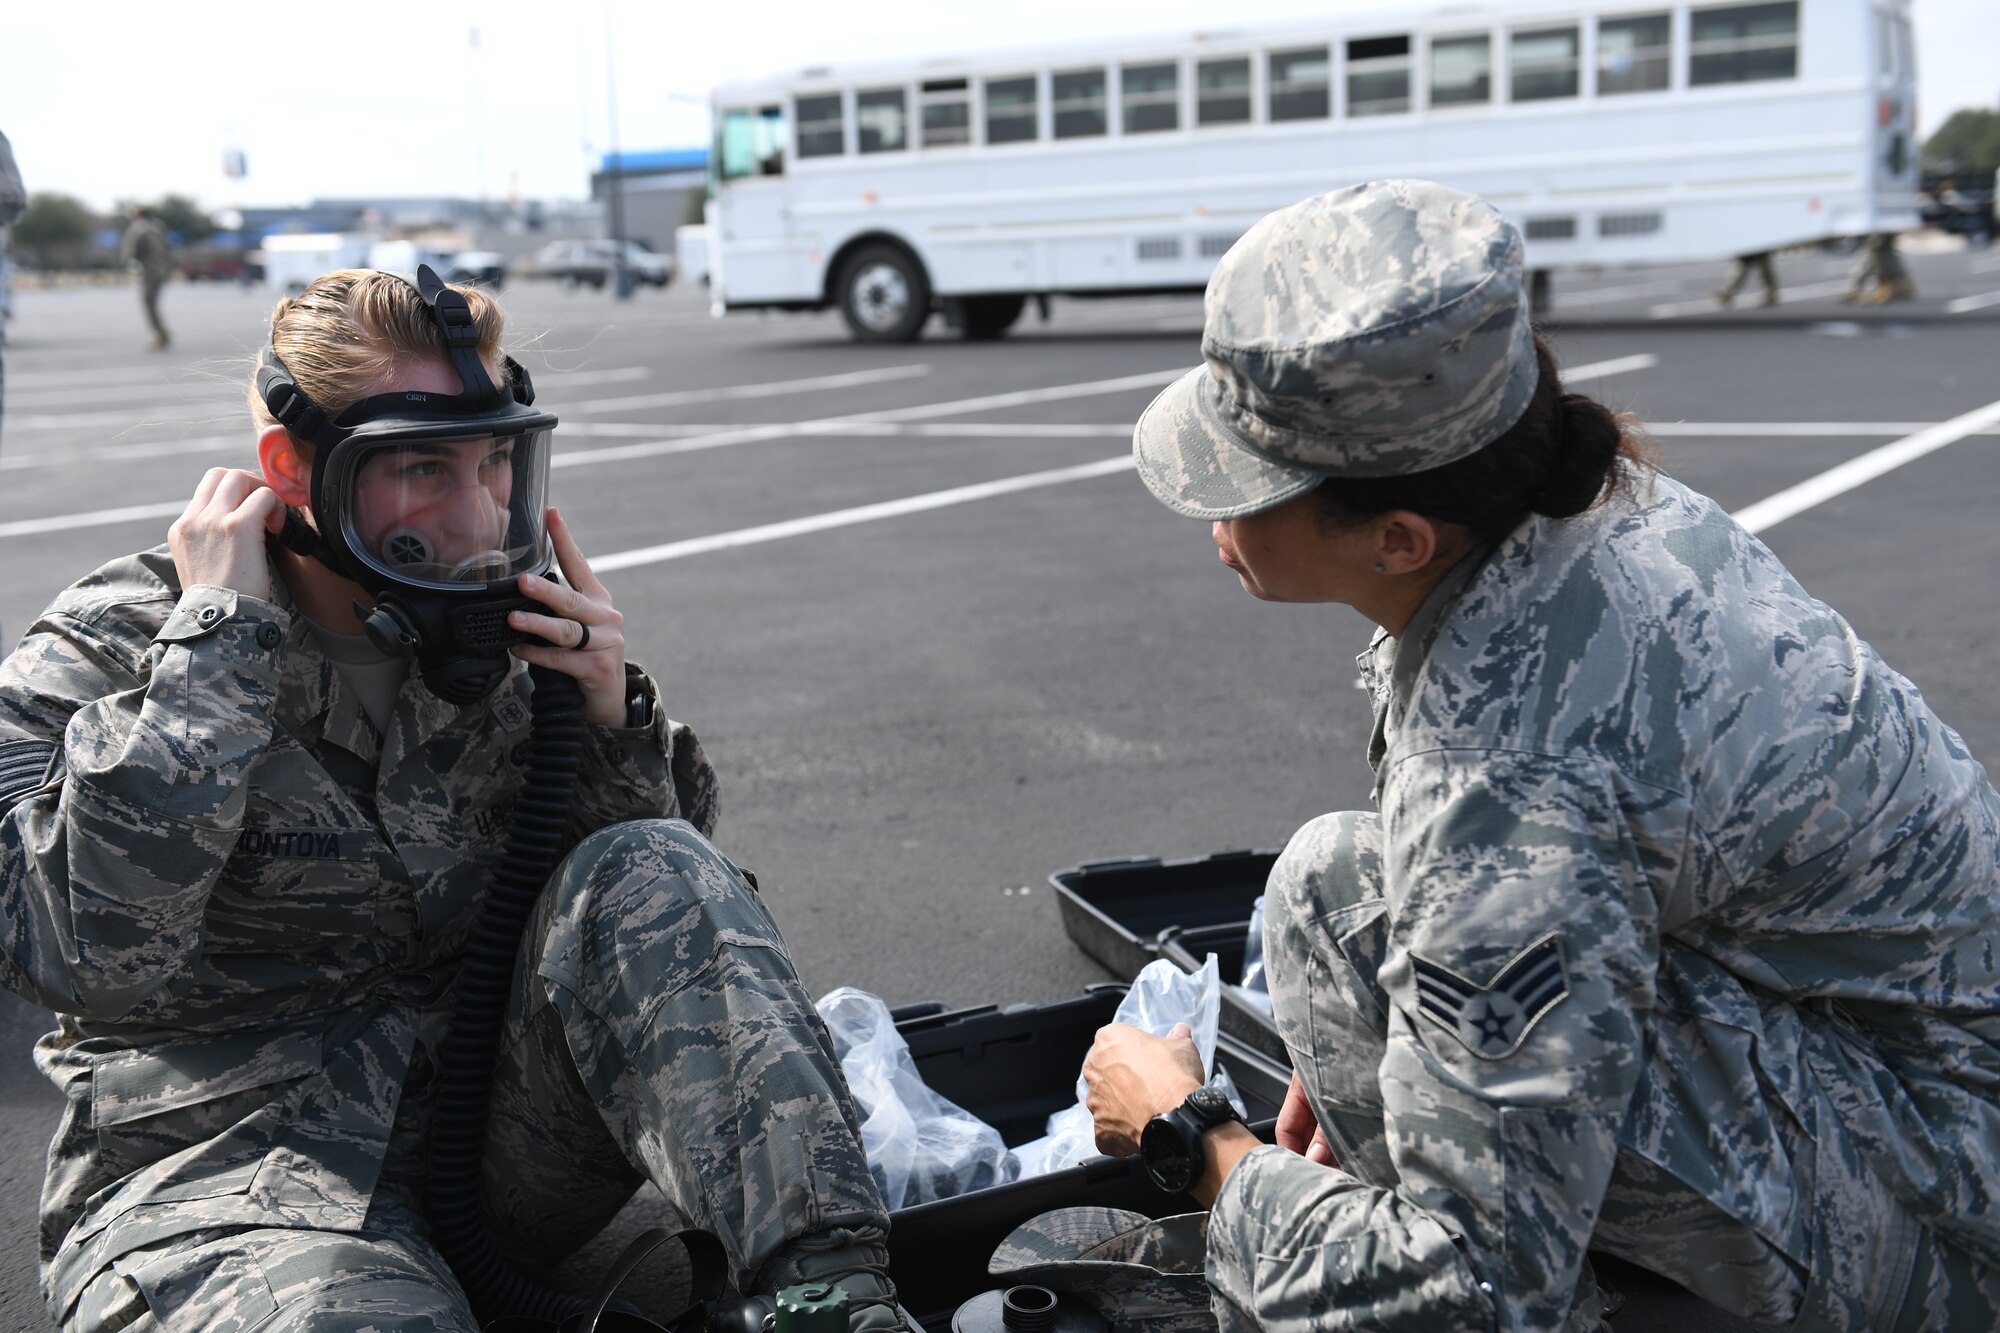 Staff Sgt. Jacquelyn Montoya and Senior Airman Kimberly Gaona, members of the 149th Fighter Wing’s MDG Det-1, which is part of the 6th CERFP task force, perform an operations check prior to deploying into the disaster incident site during response training Feb. 5 in Round Rock, Texas.